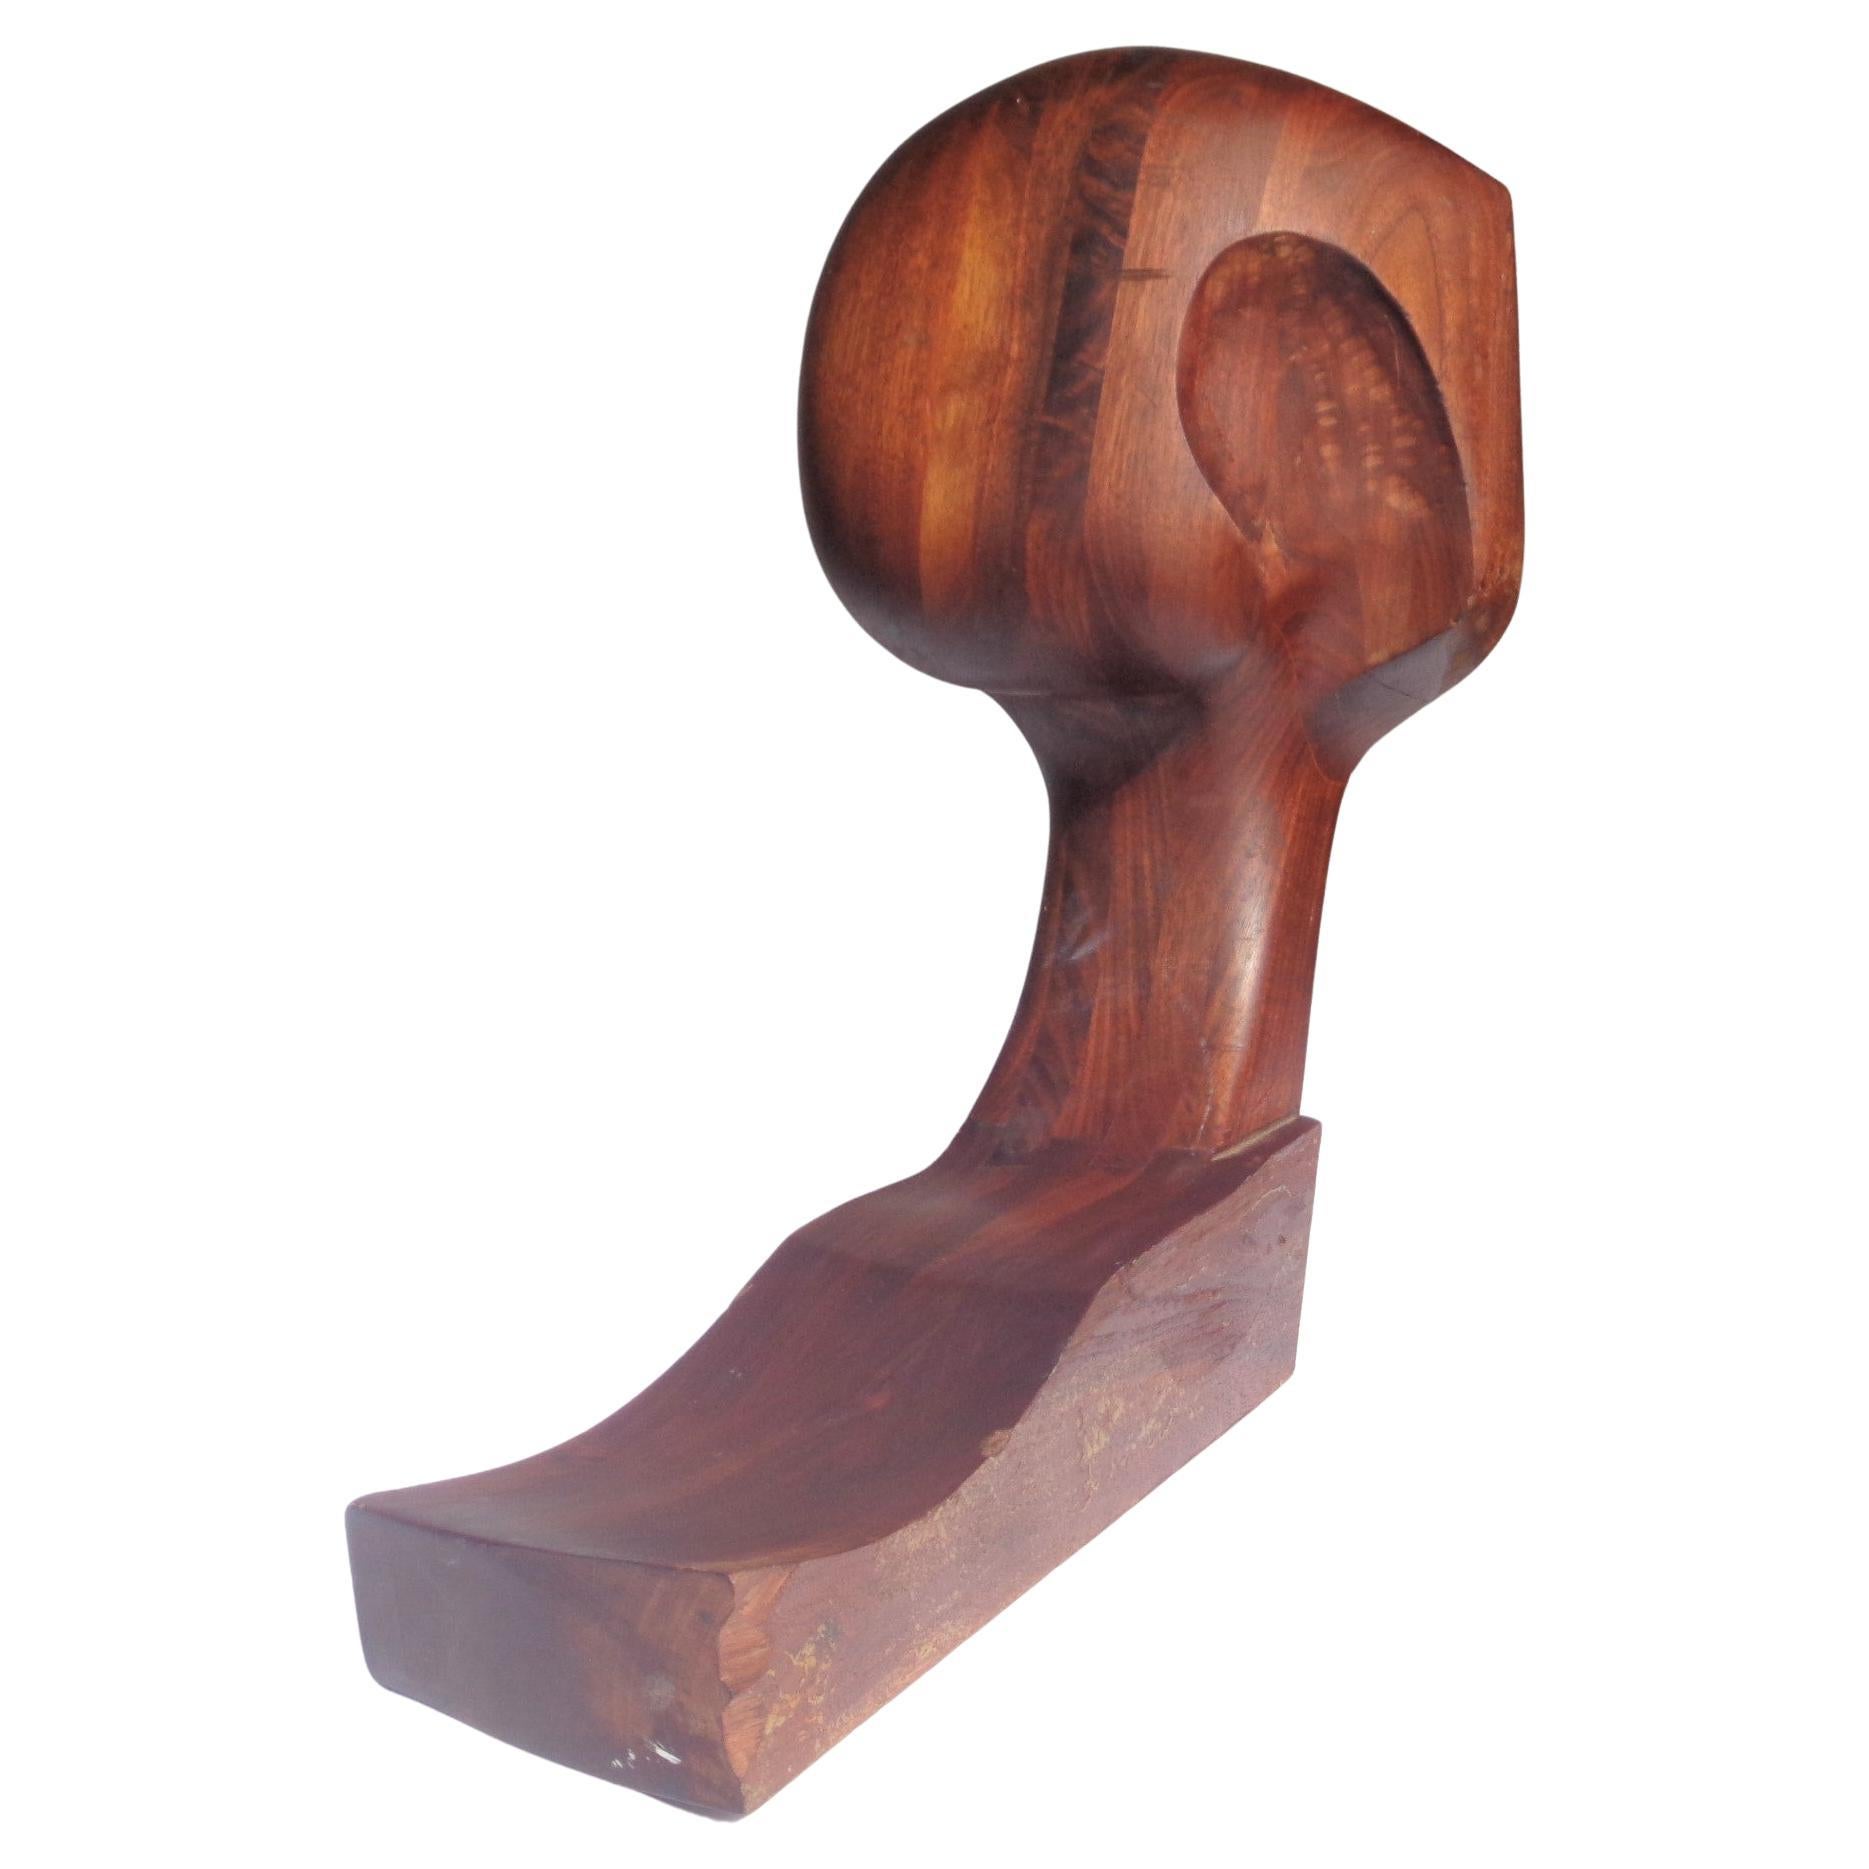 American Studio Craft Movement Abstract Sculpture Wood Bust, 1970-1980